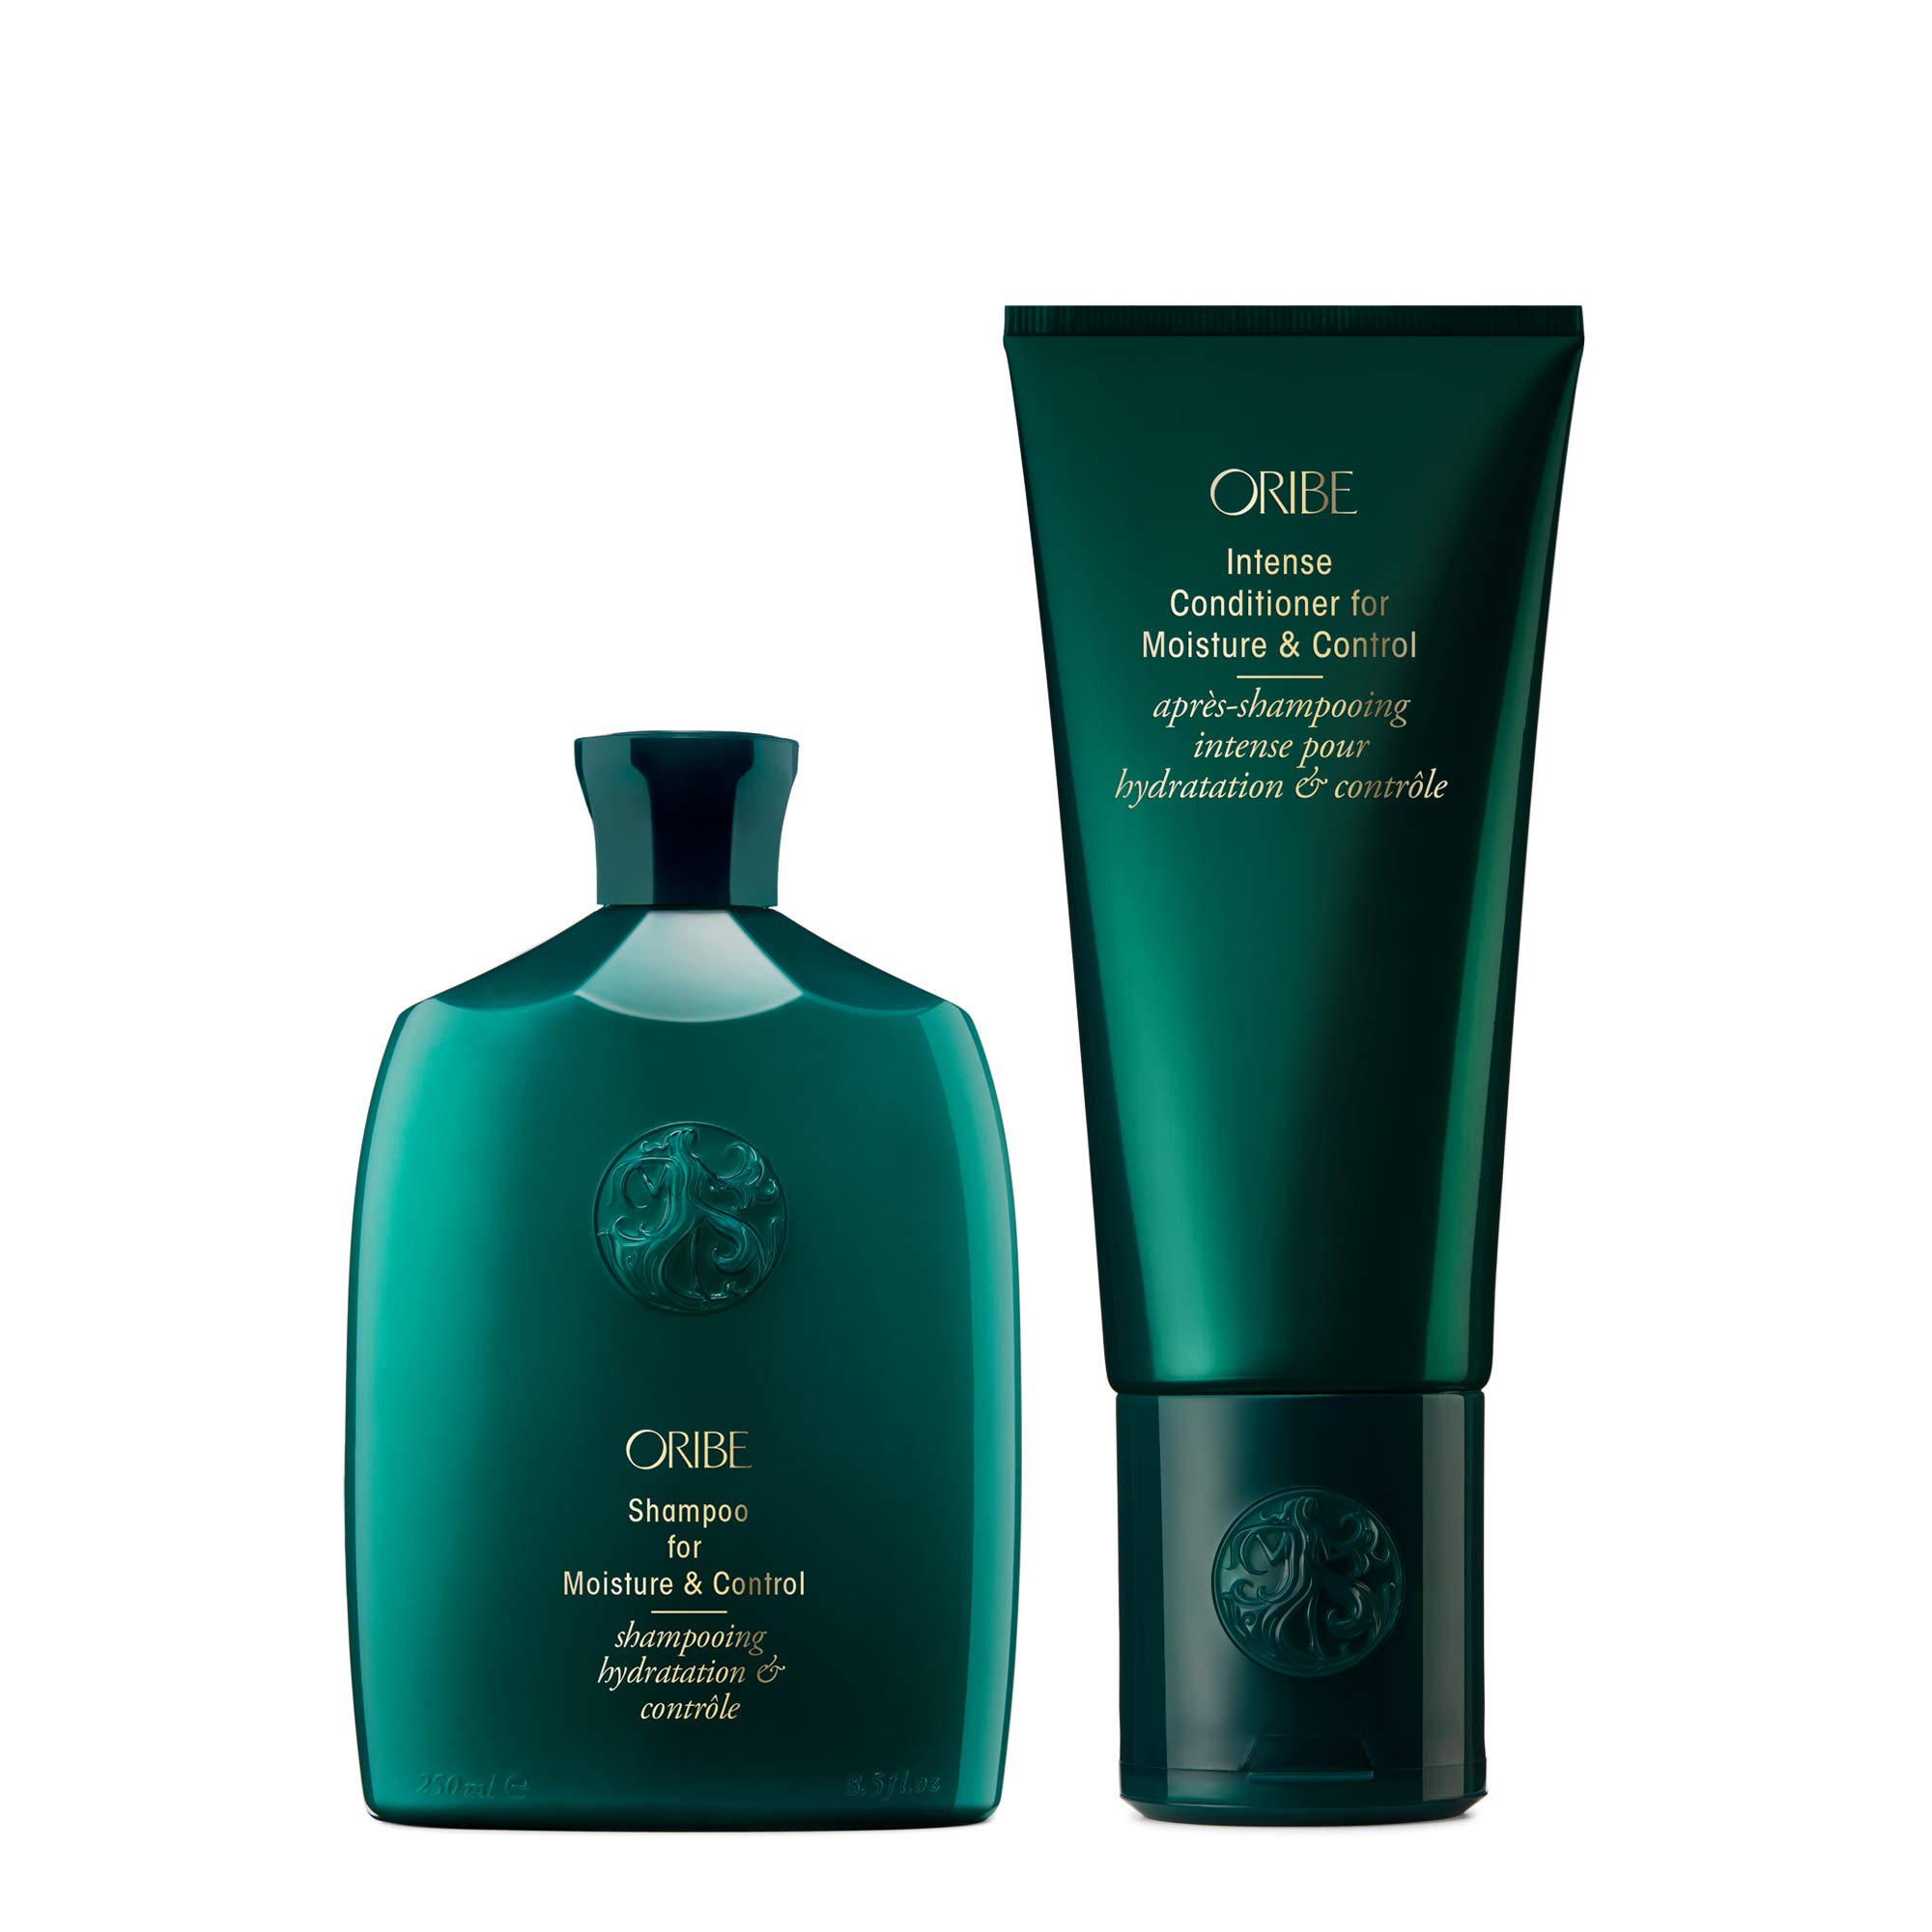 ORIBE Shampoo and Conditioner for Moisture & Control Bundle